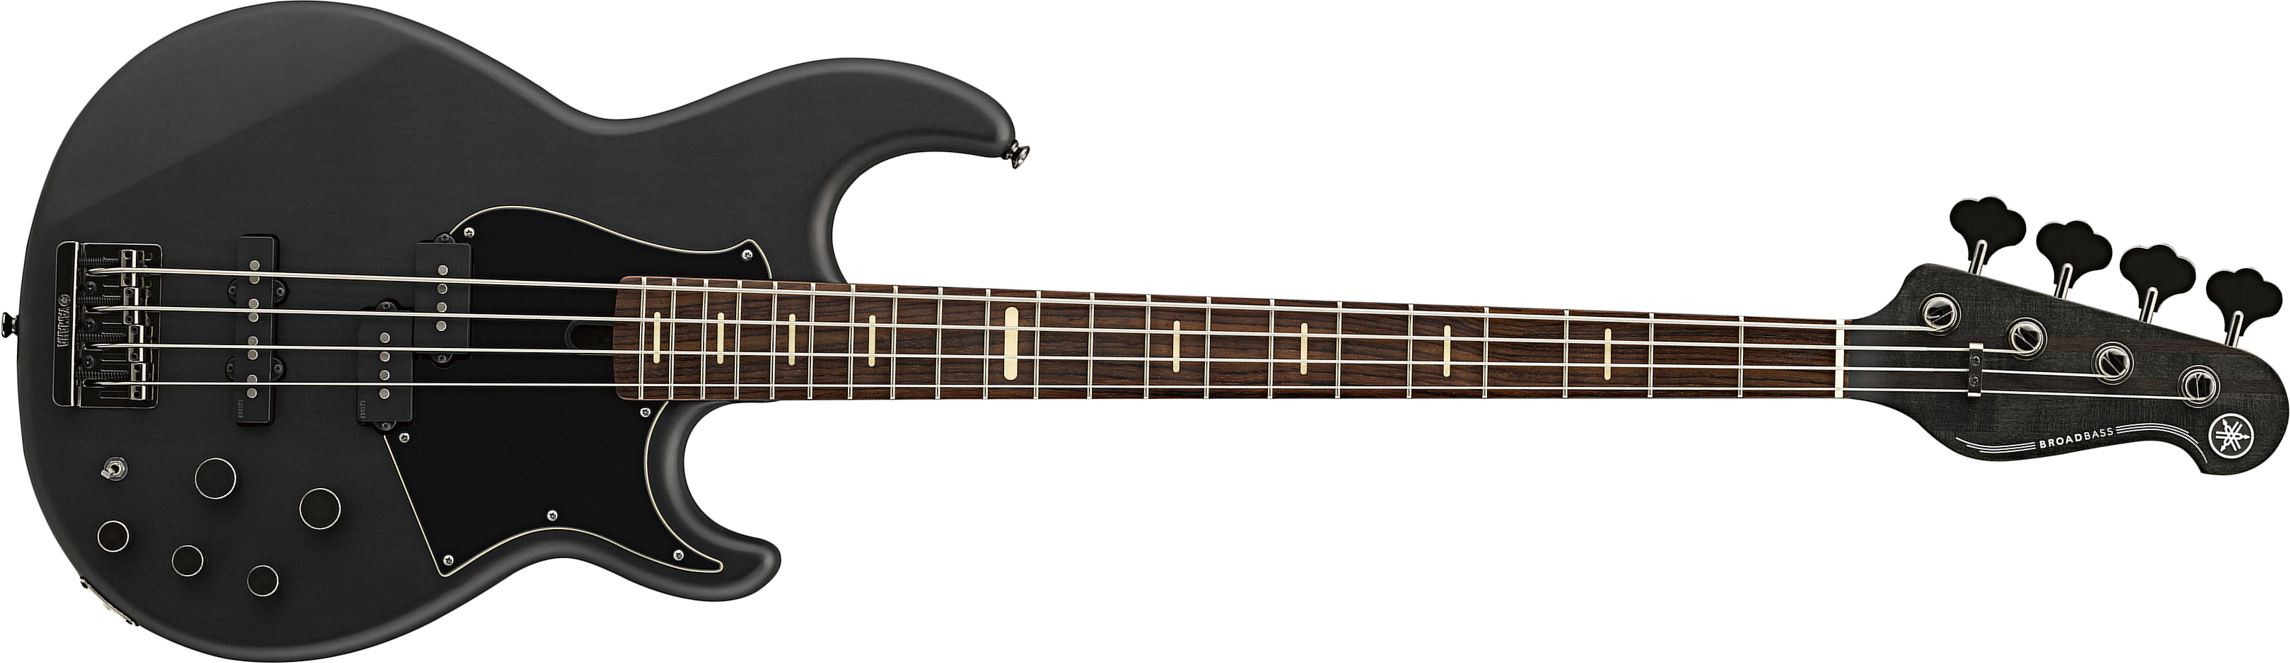 Yamaha Bb734a Active Rw - Matte Translucent Black - Solid body electric bass - Main picture